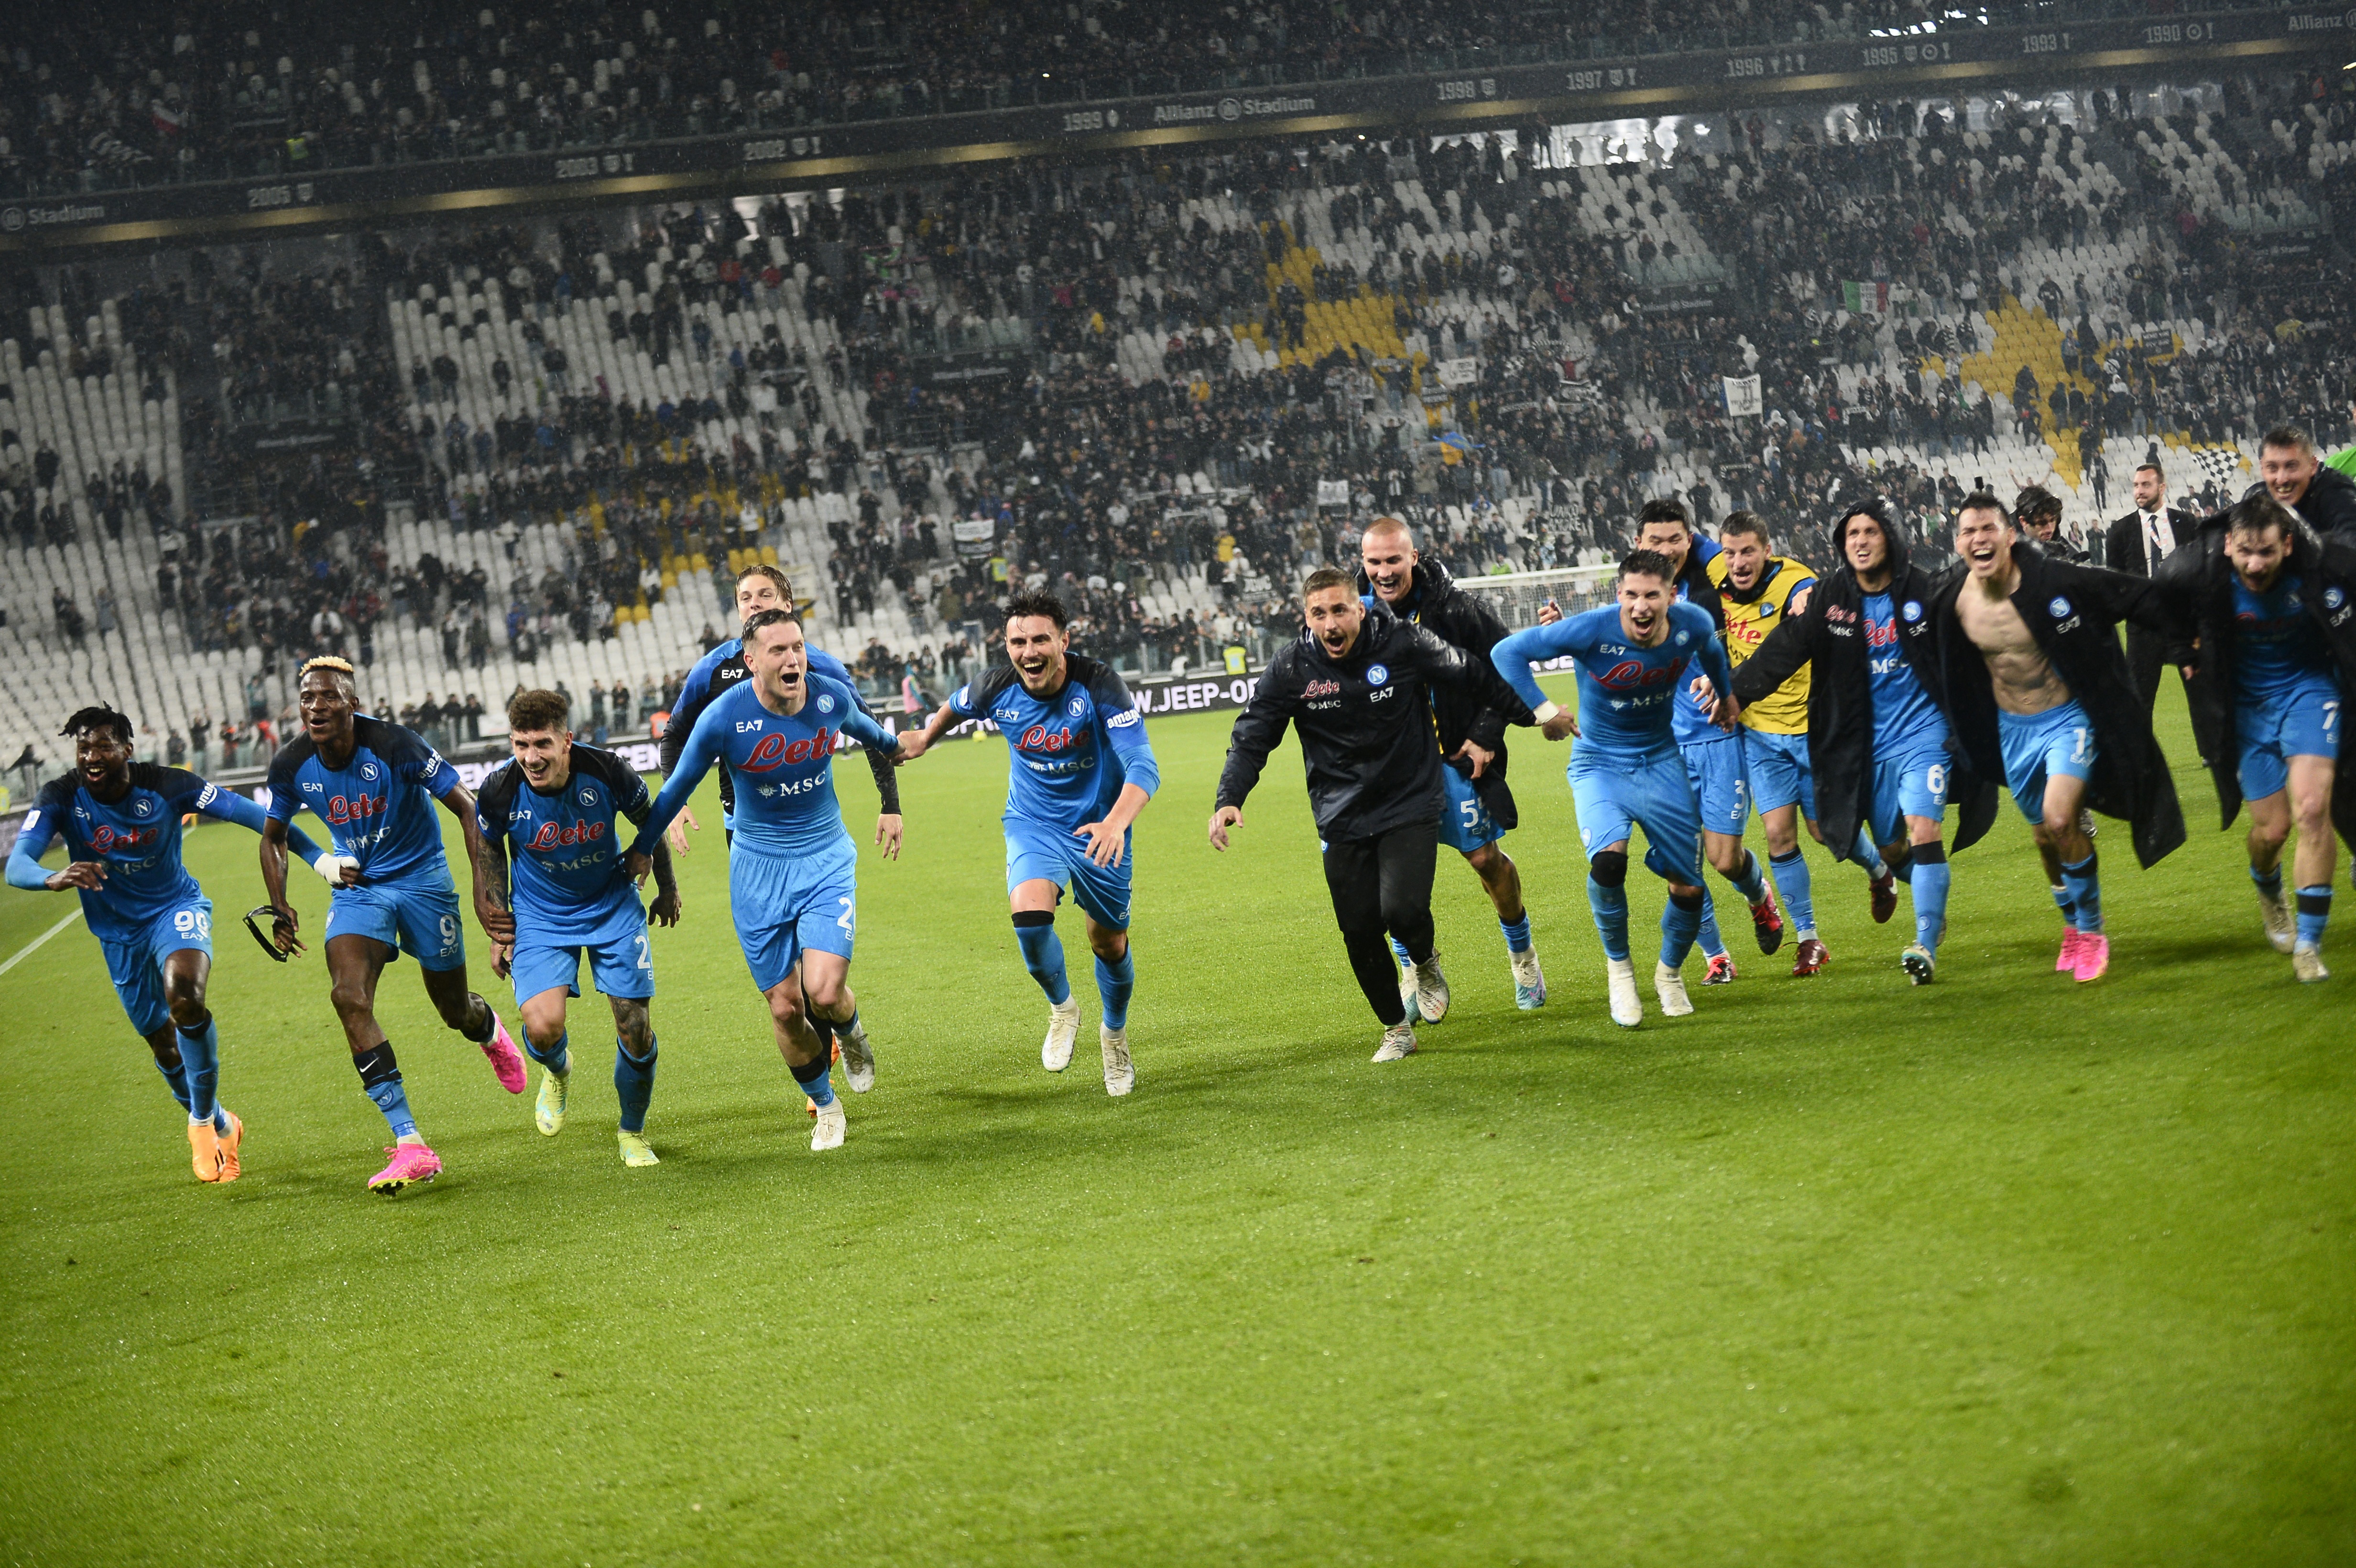 Serie A » News » Napoli squeeze past Milan to reignite title push